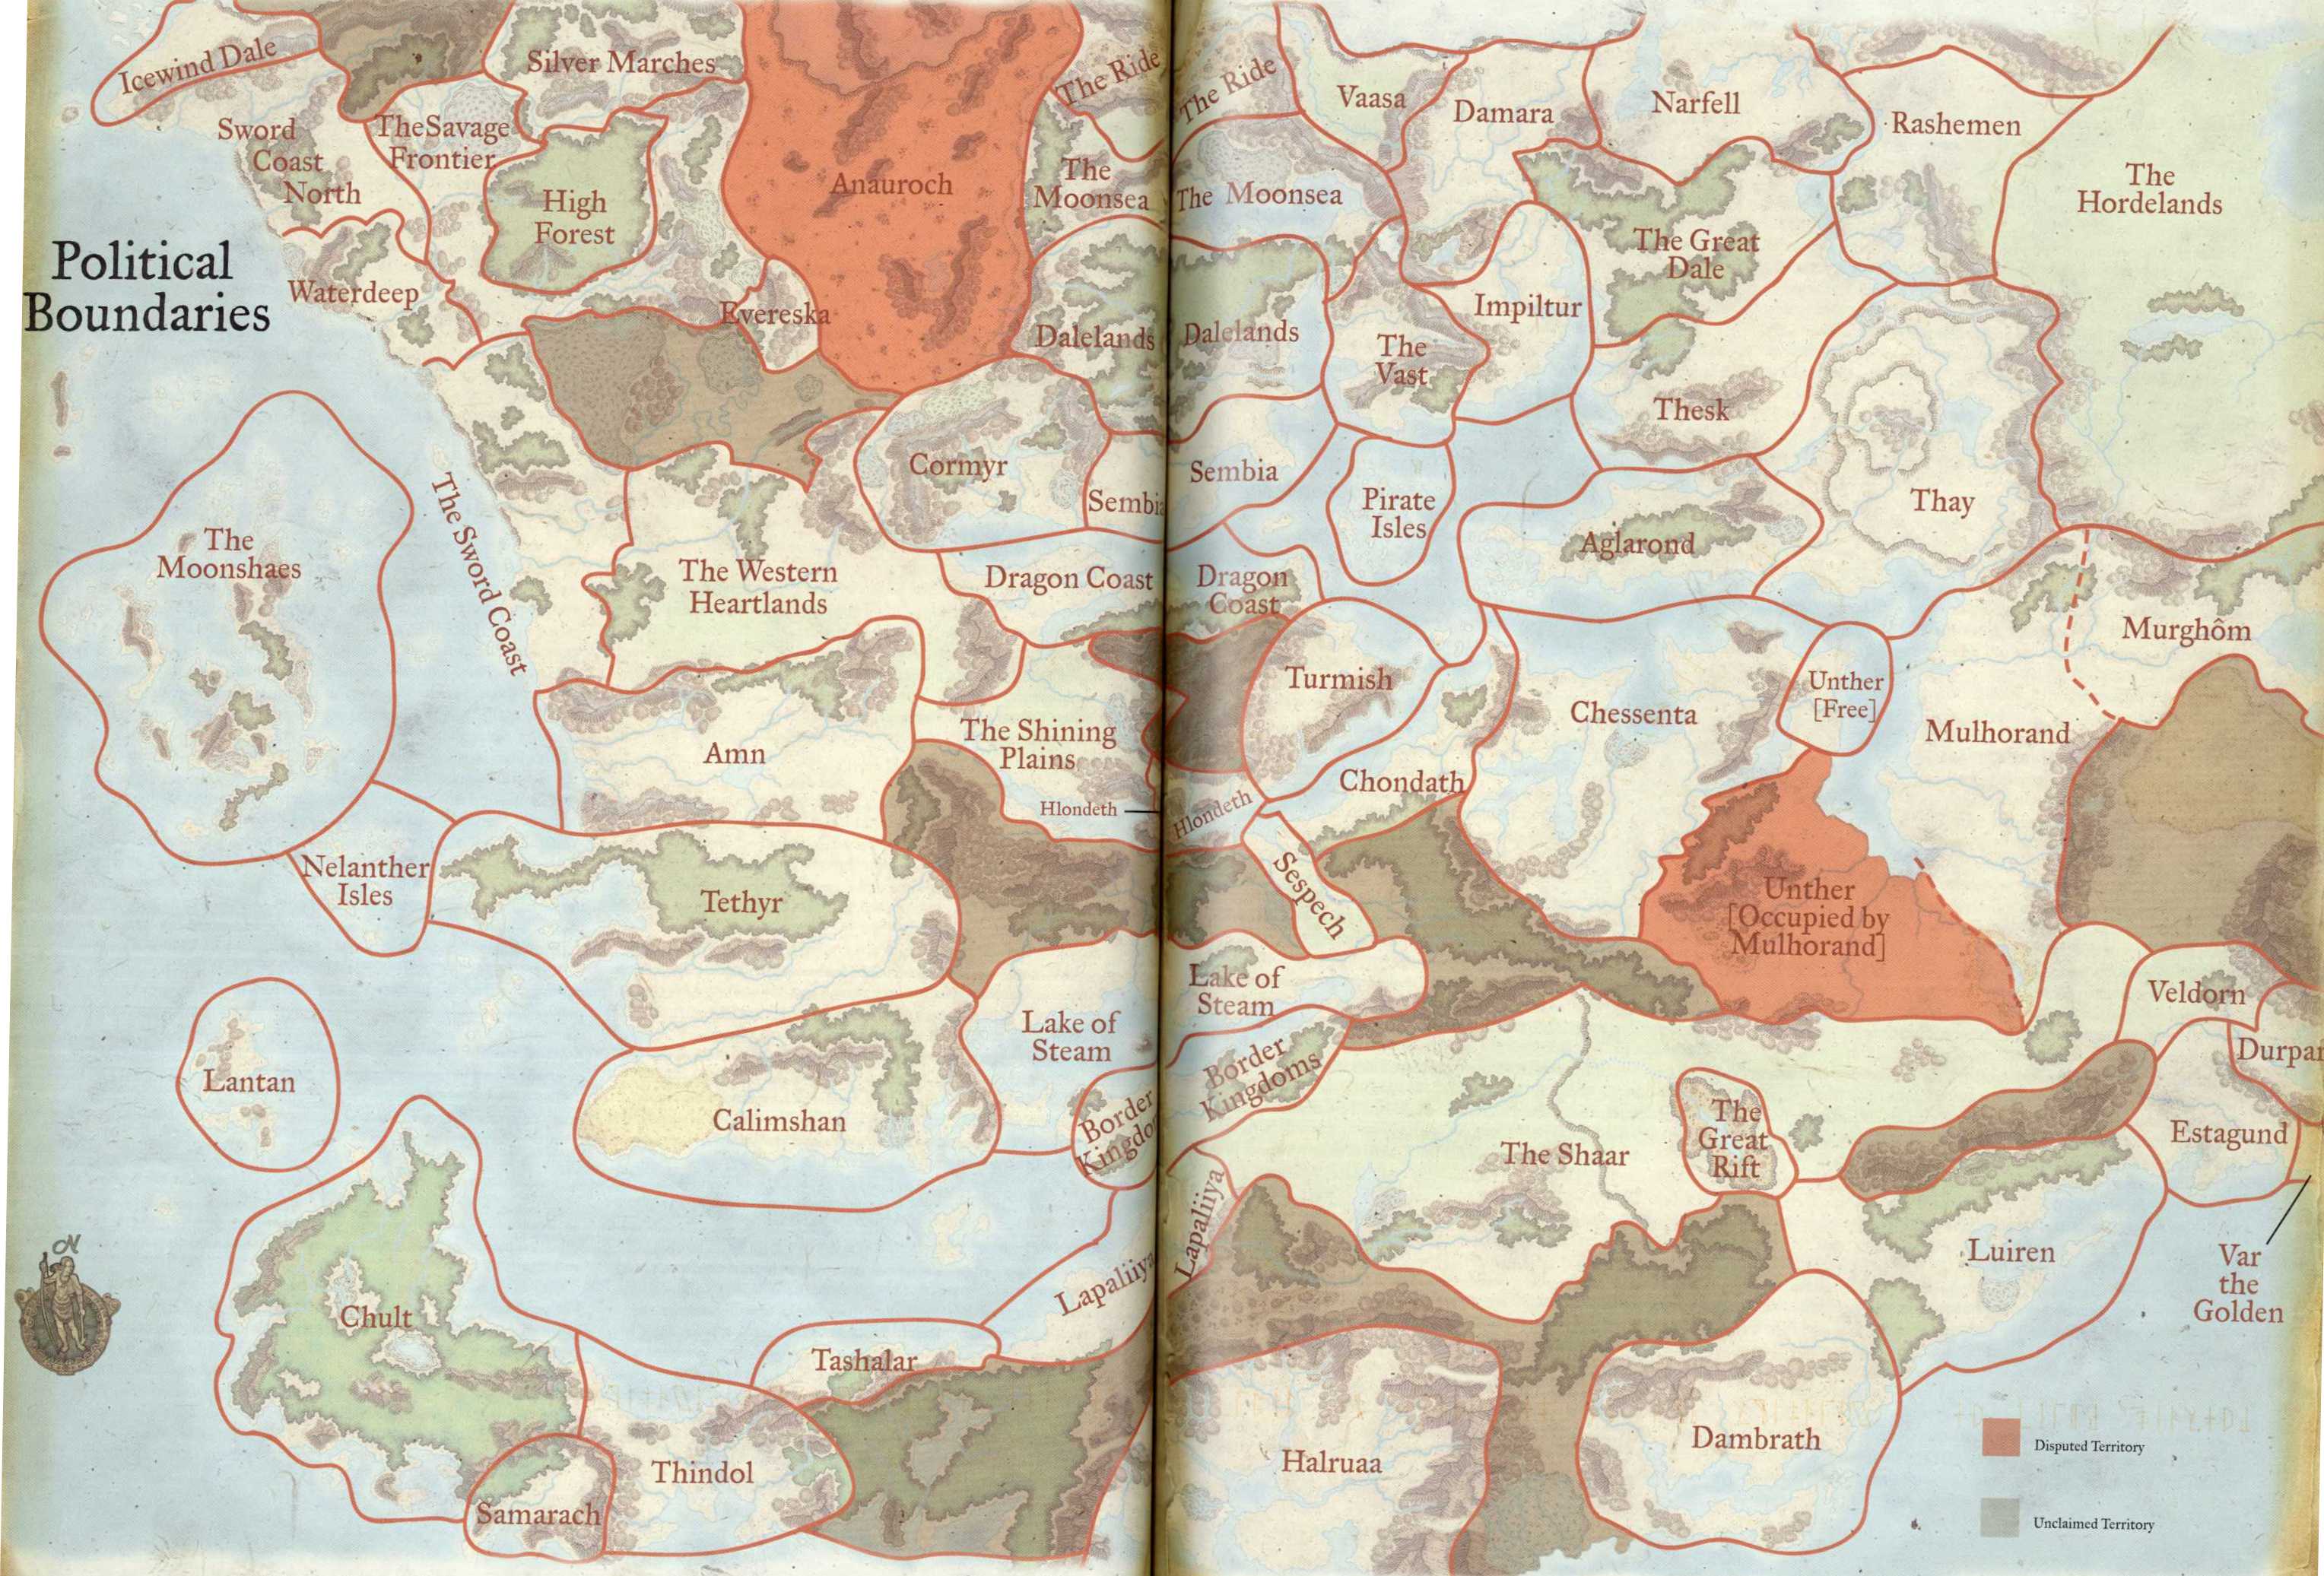 looking for a map of the human ethnicities of the Realms... : dndnext